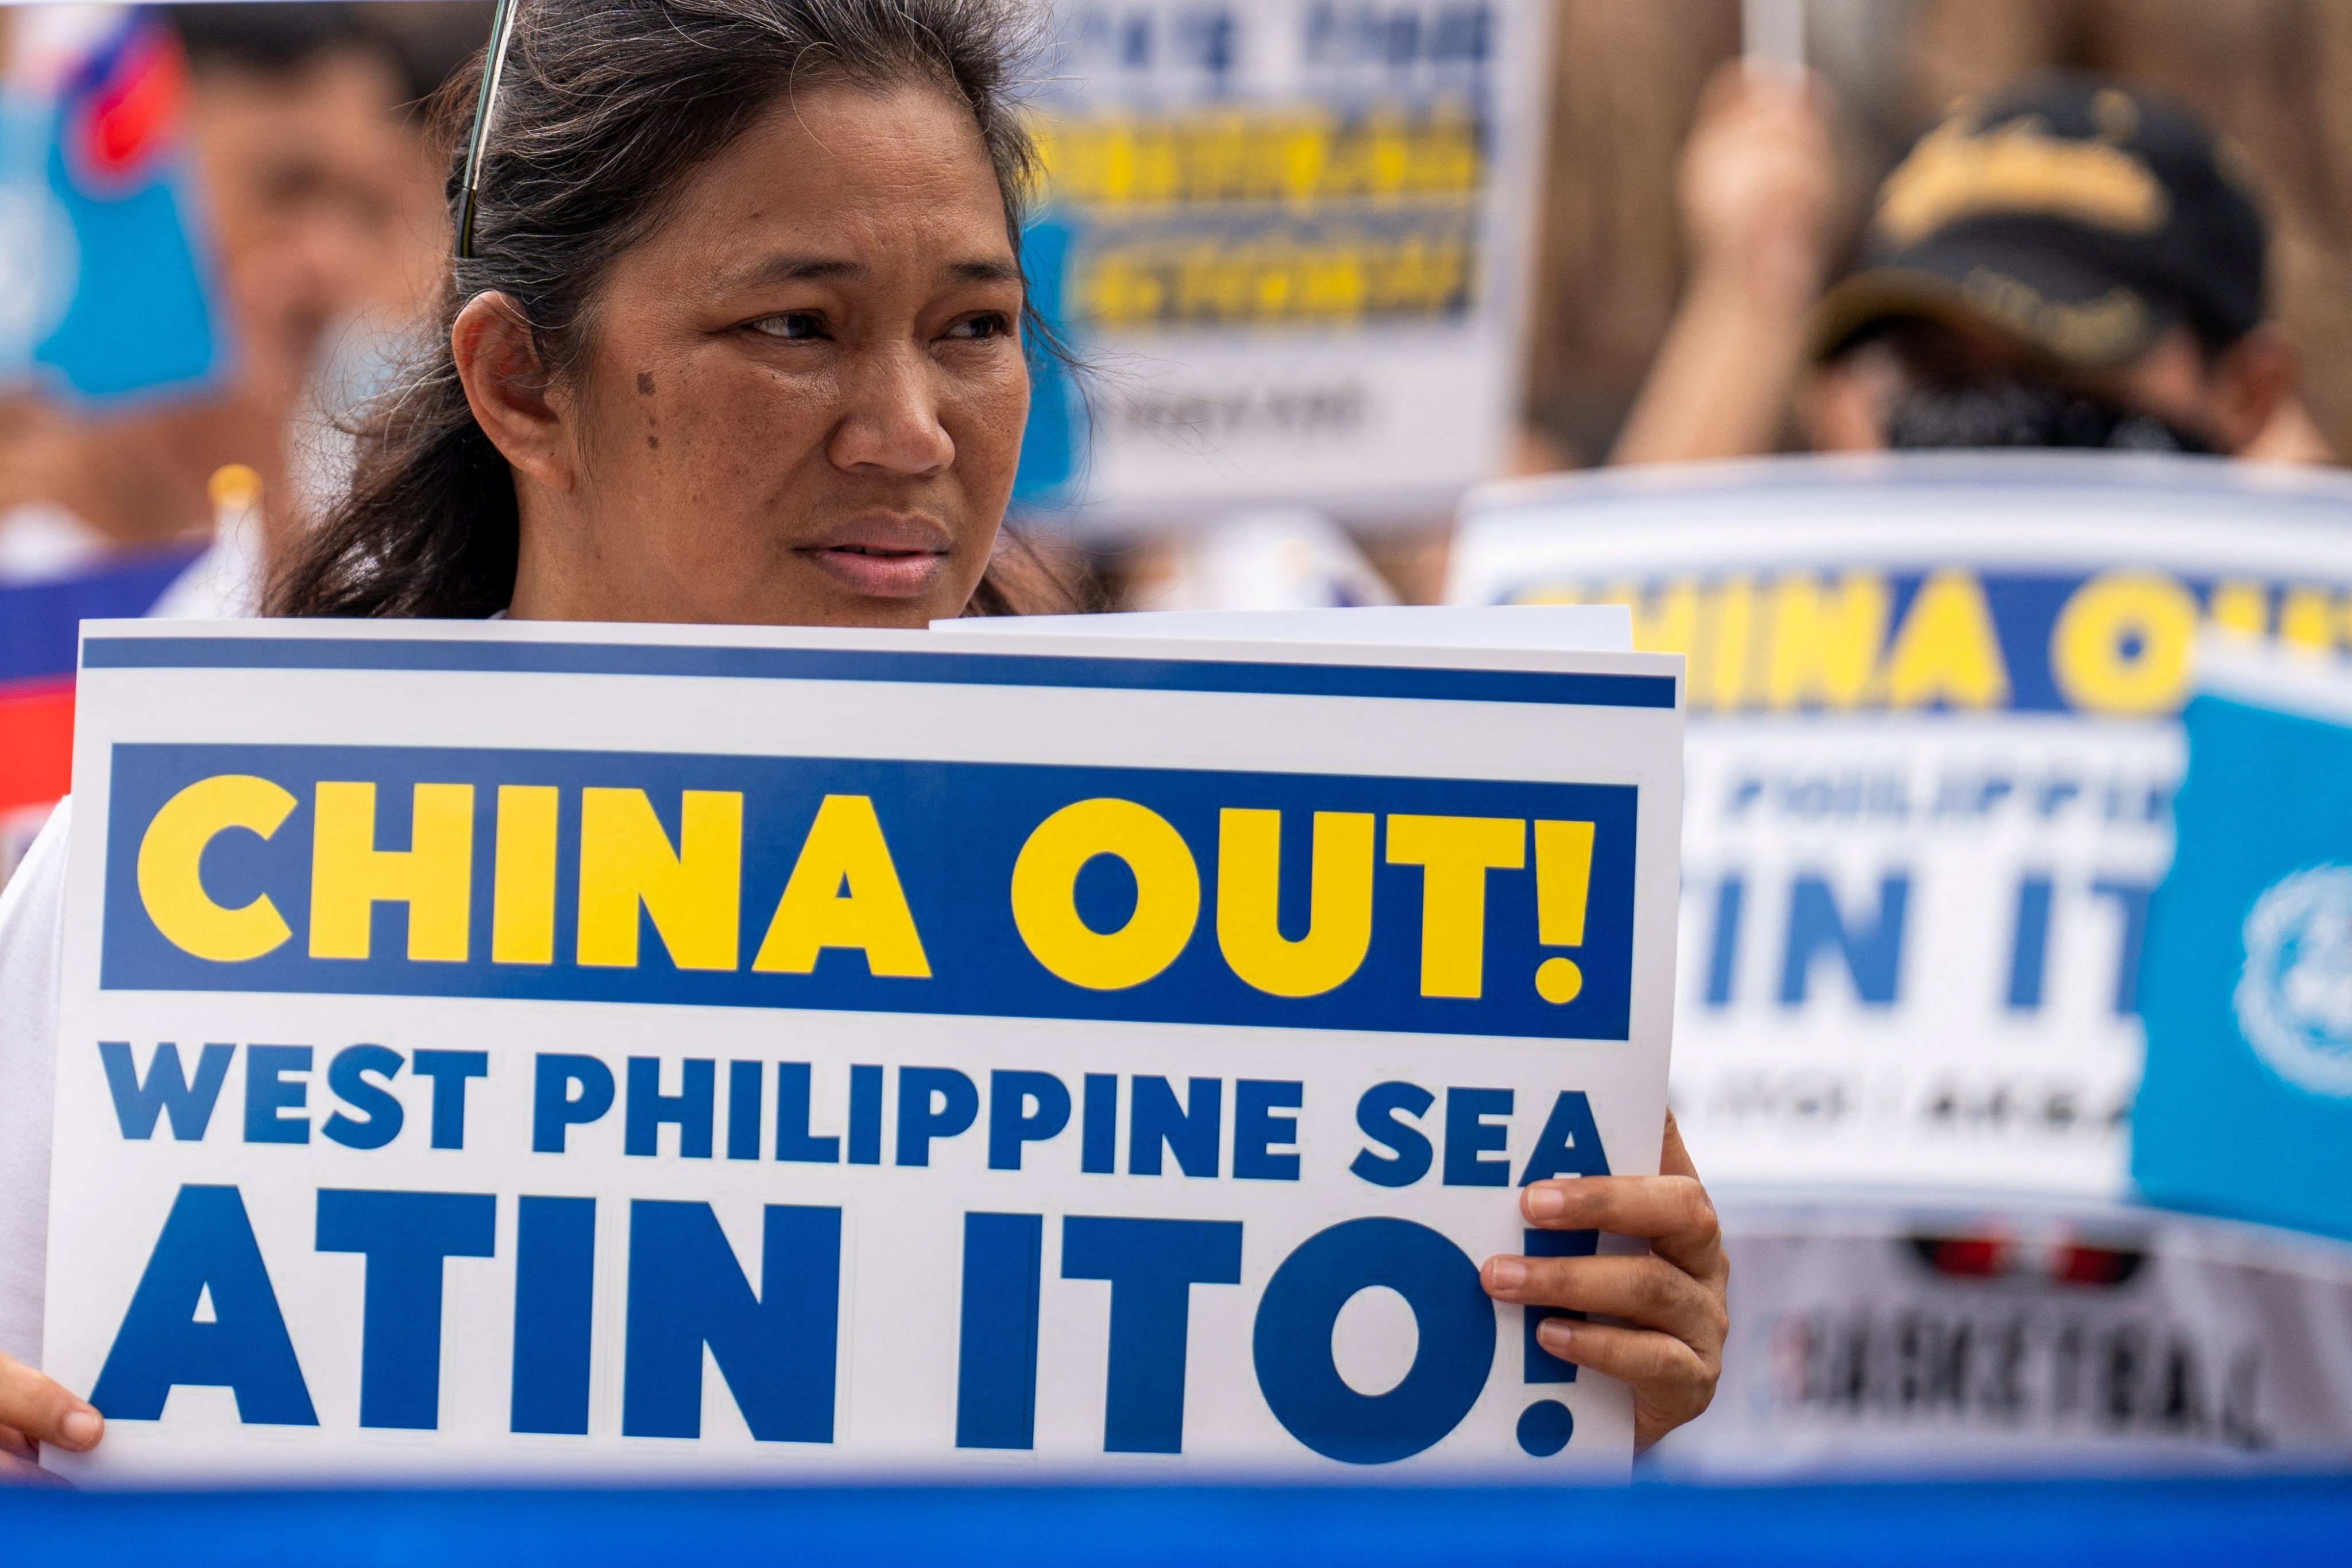 A woman holds a placard during a protest marking the eighth anniversary of the 2016 arbitration ruling over China’s claims in the South China Sea, in Quezon City. Photo: Reuters